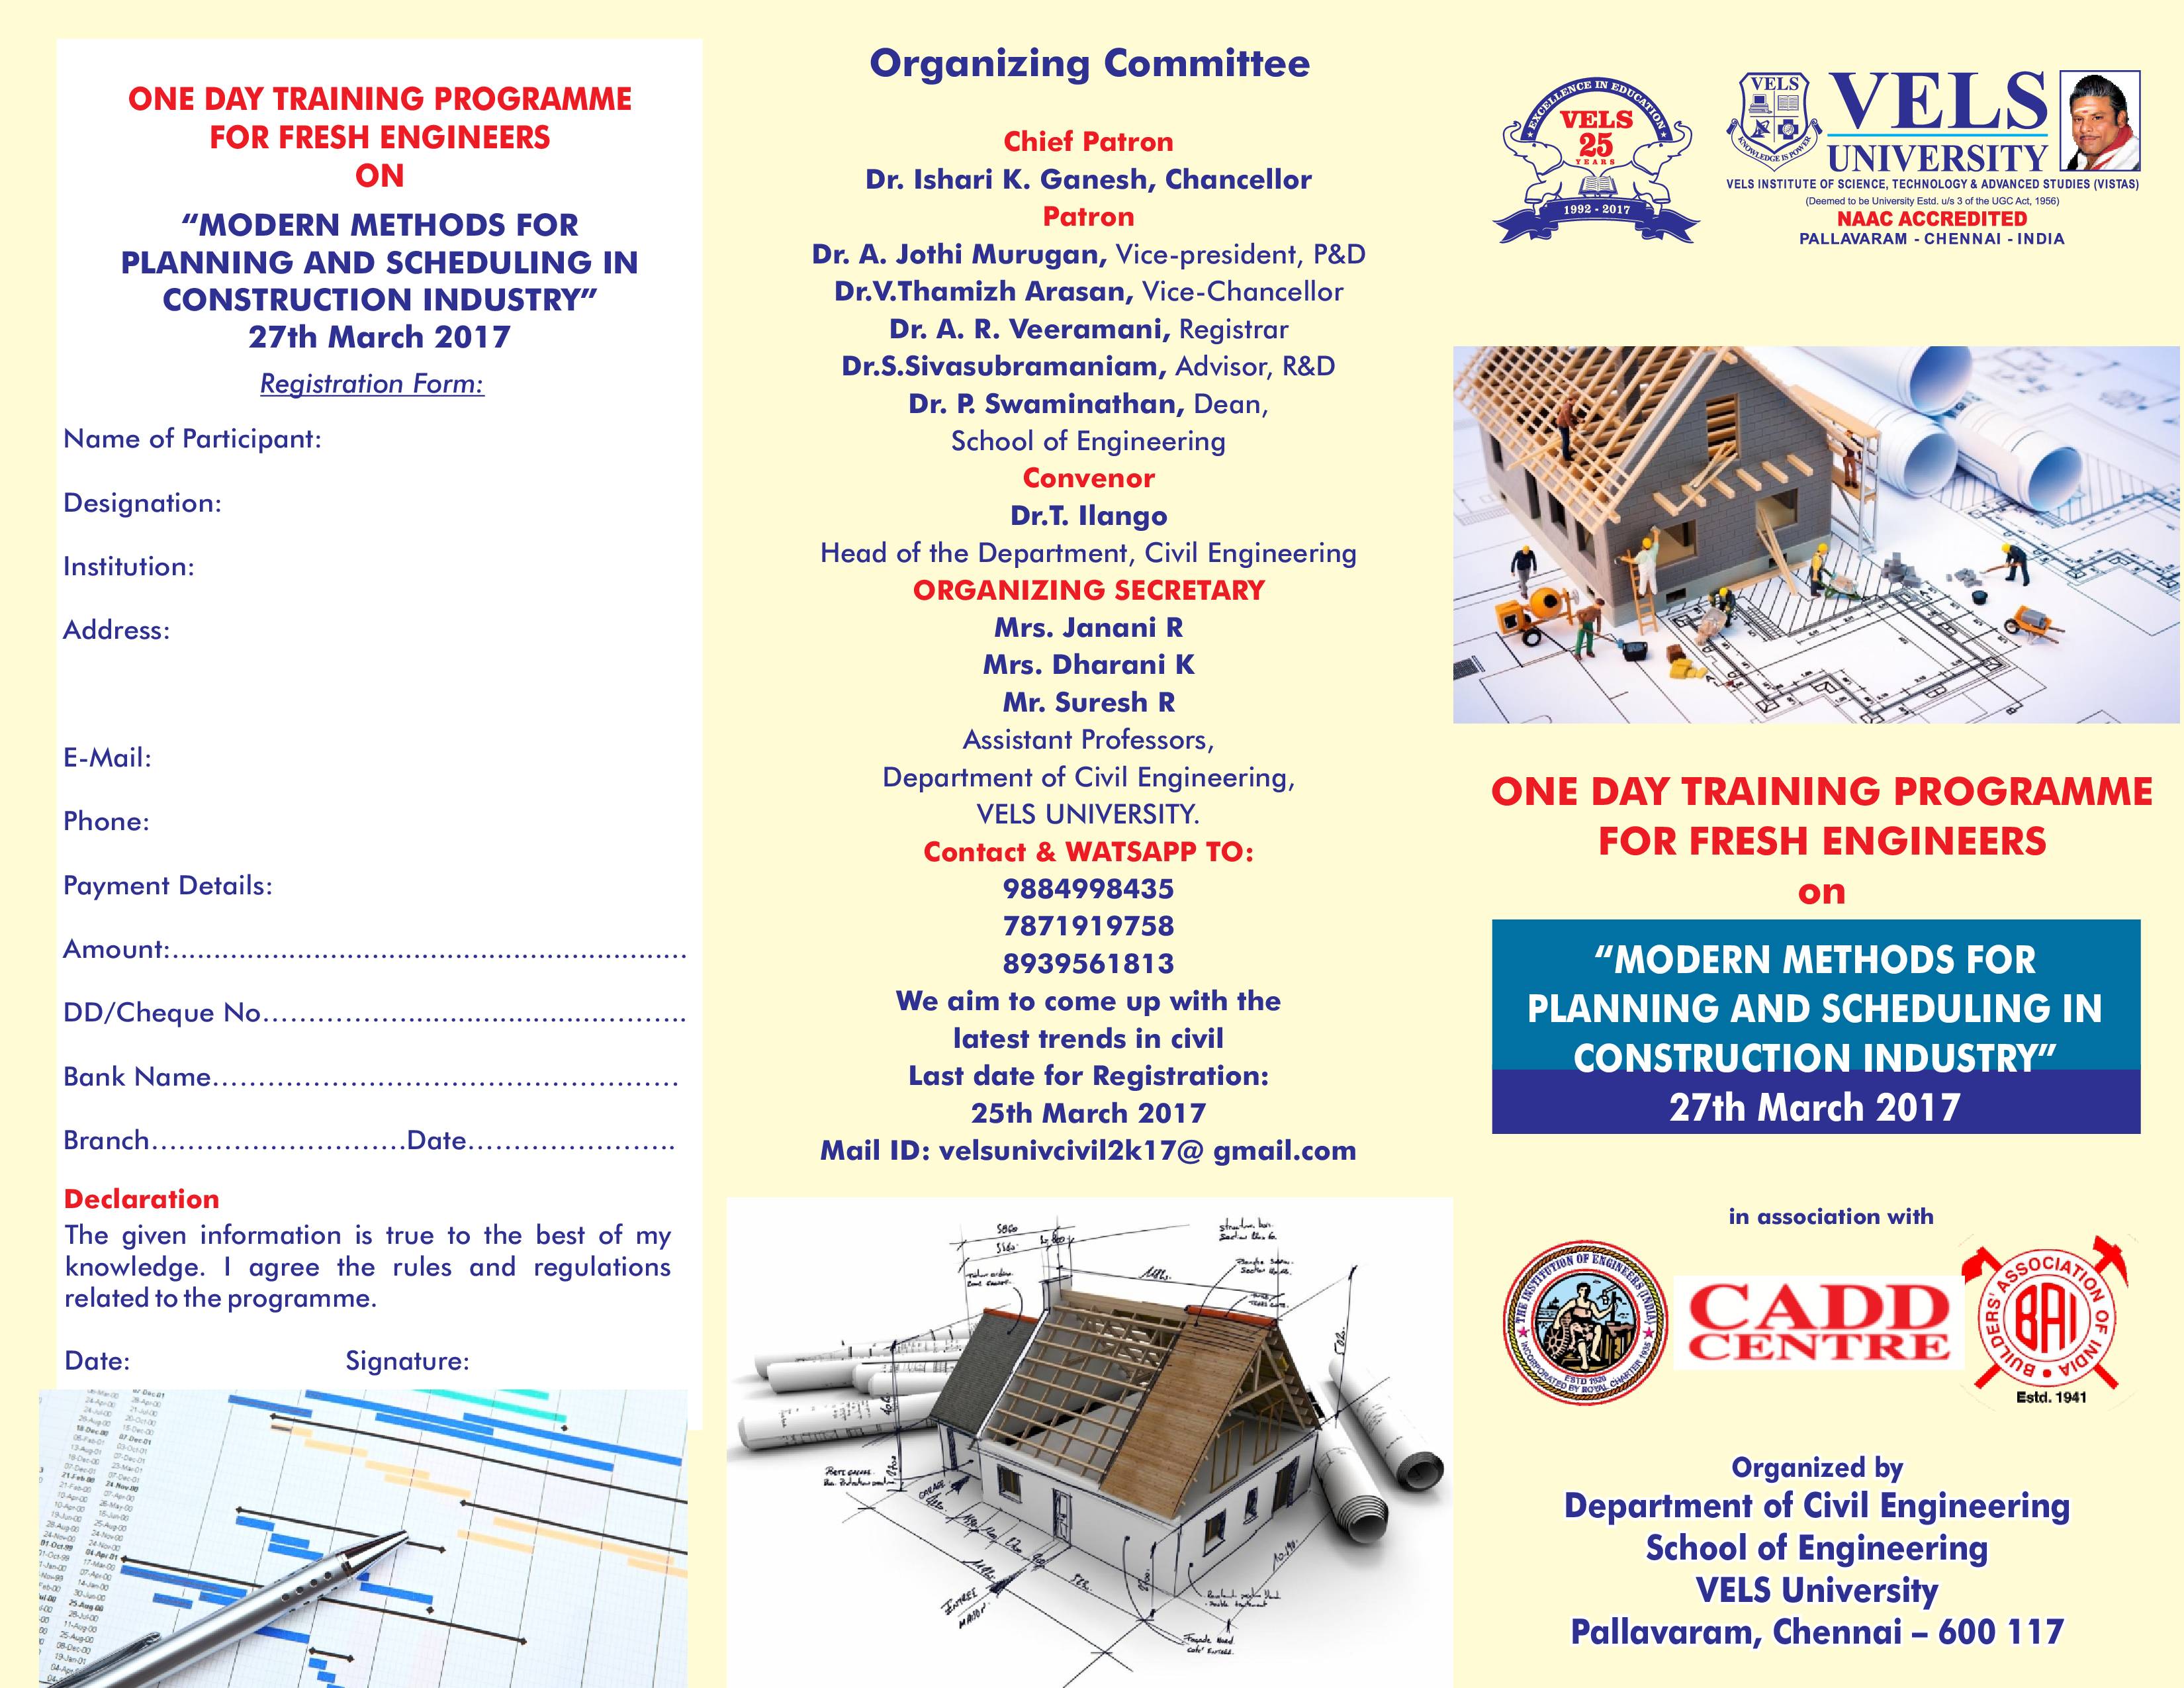 Modern Methods for Planning and Scheduling in Construction Industry MMPSCI 17